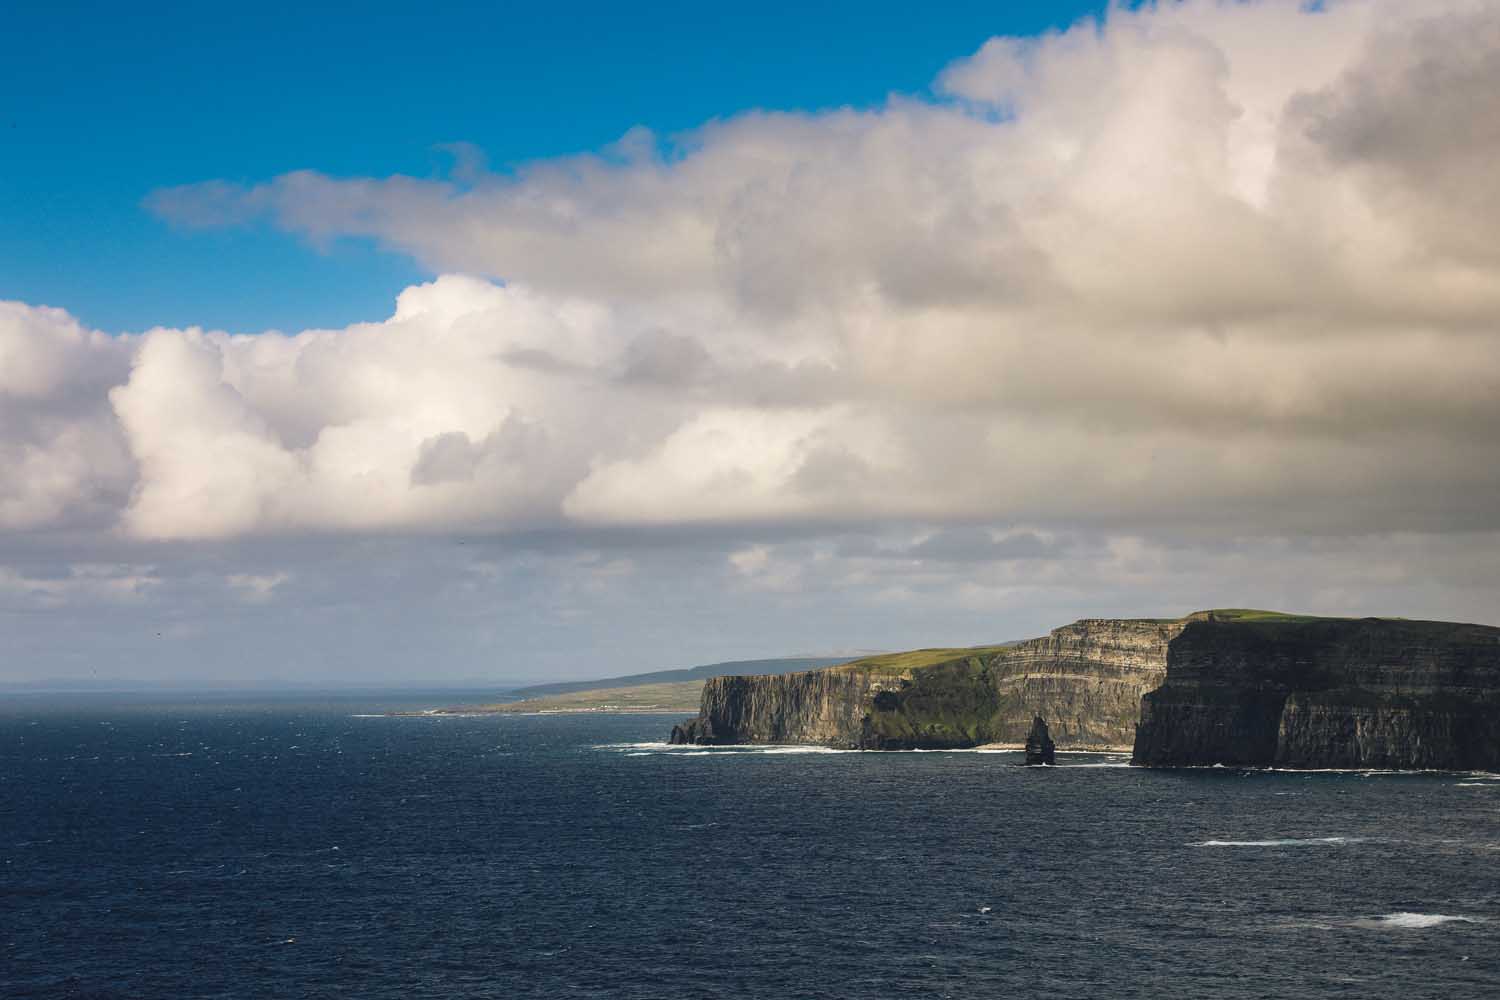 View of the coastline at The Cliff's of Moher, Co. Clare, Ireland